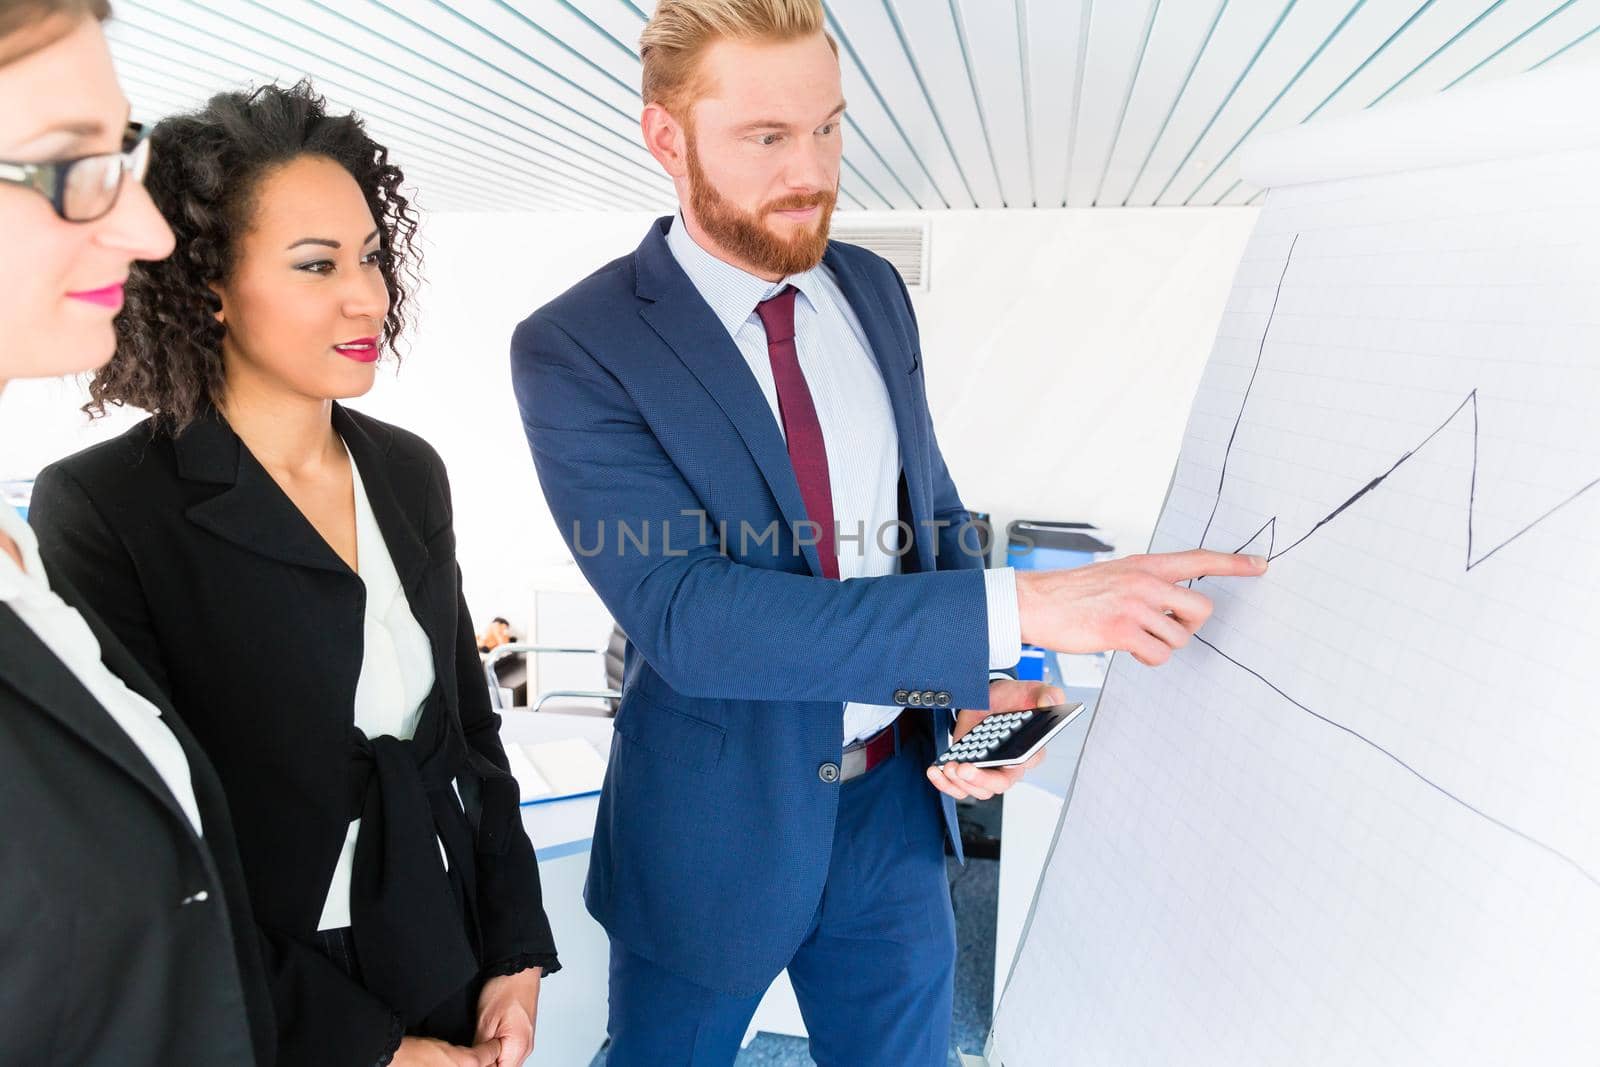 Business people analyze a graph on the whiteboard - man holds a pocket calculator and is pointing at the graph